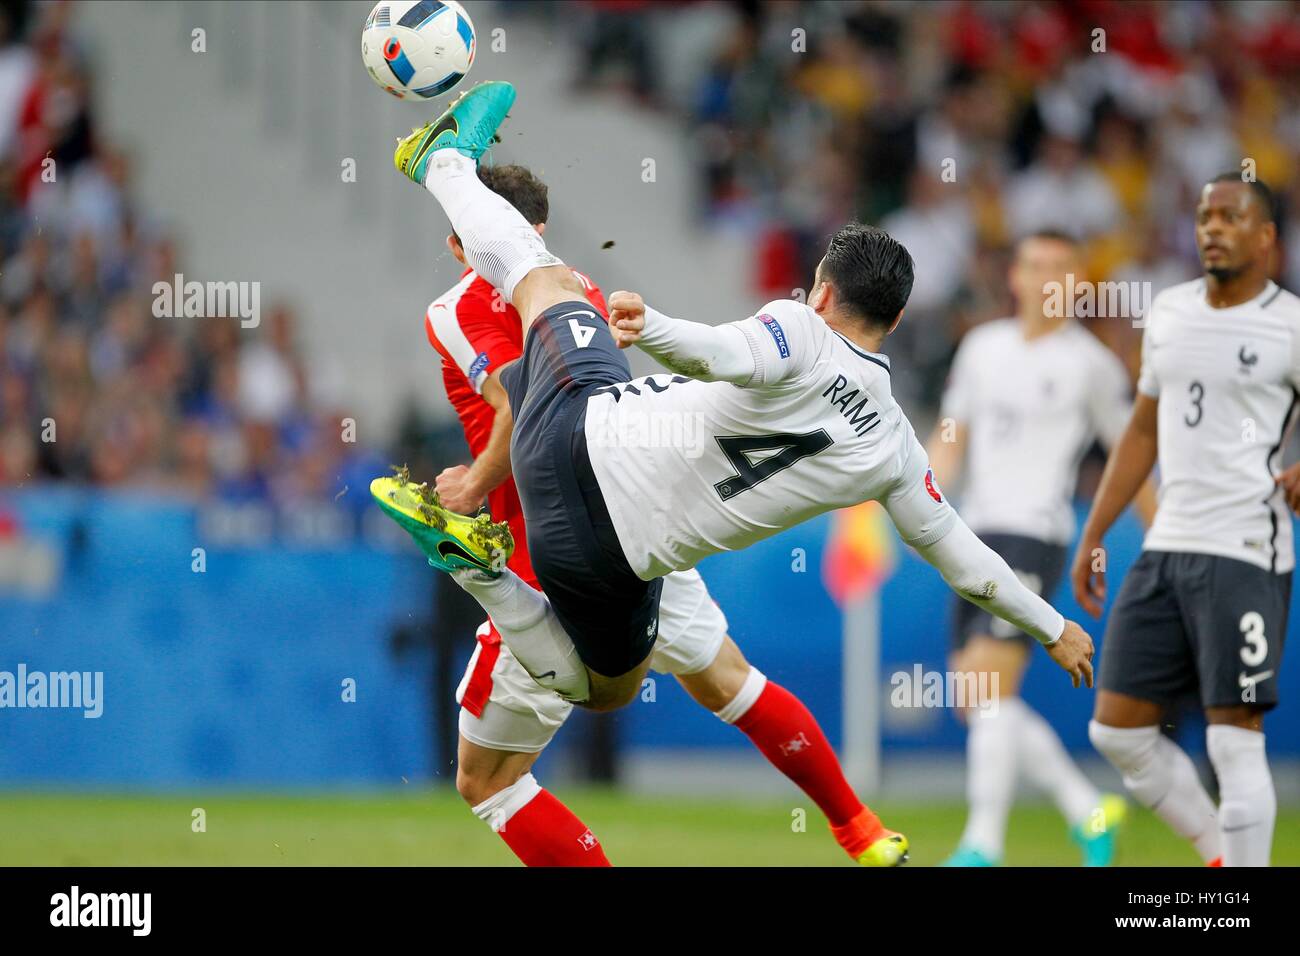 ADIL RAMI GOES IN HIGH ON ADMI SWITZERLAND V FRANCE STADE PIERRE-MAUROY LILLE FRANCE 19 June 2016 Stock Photo